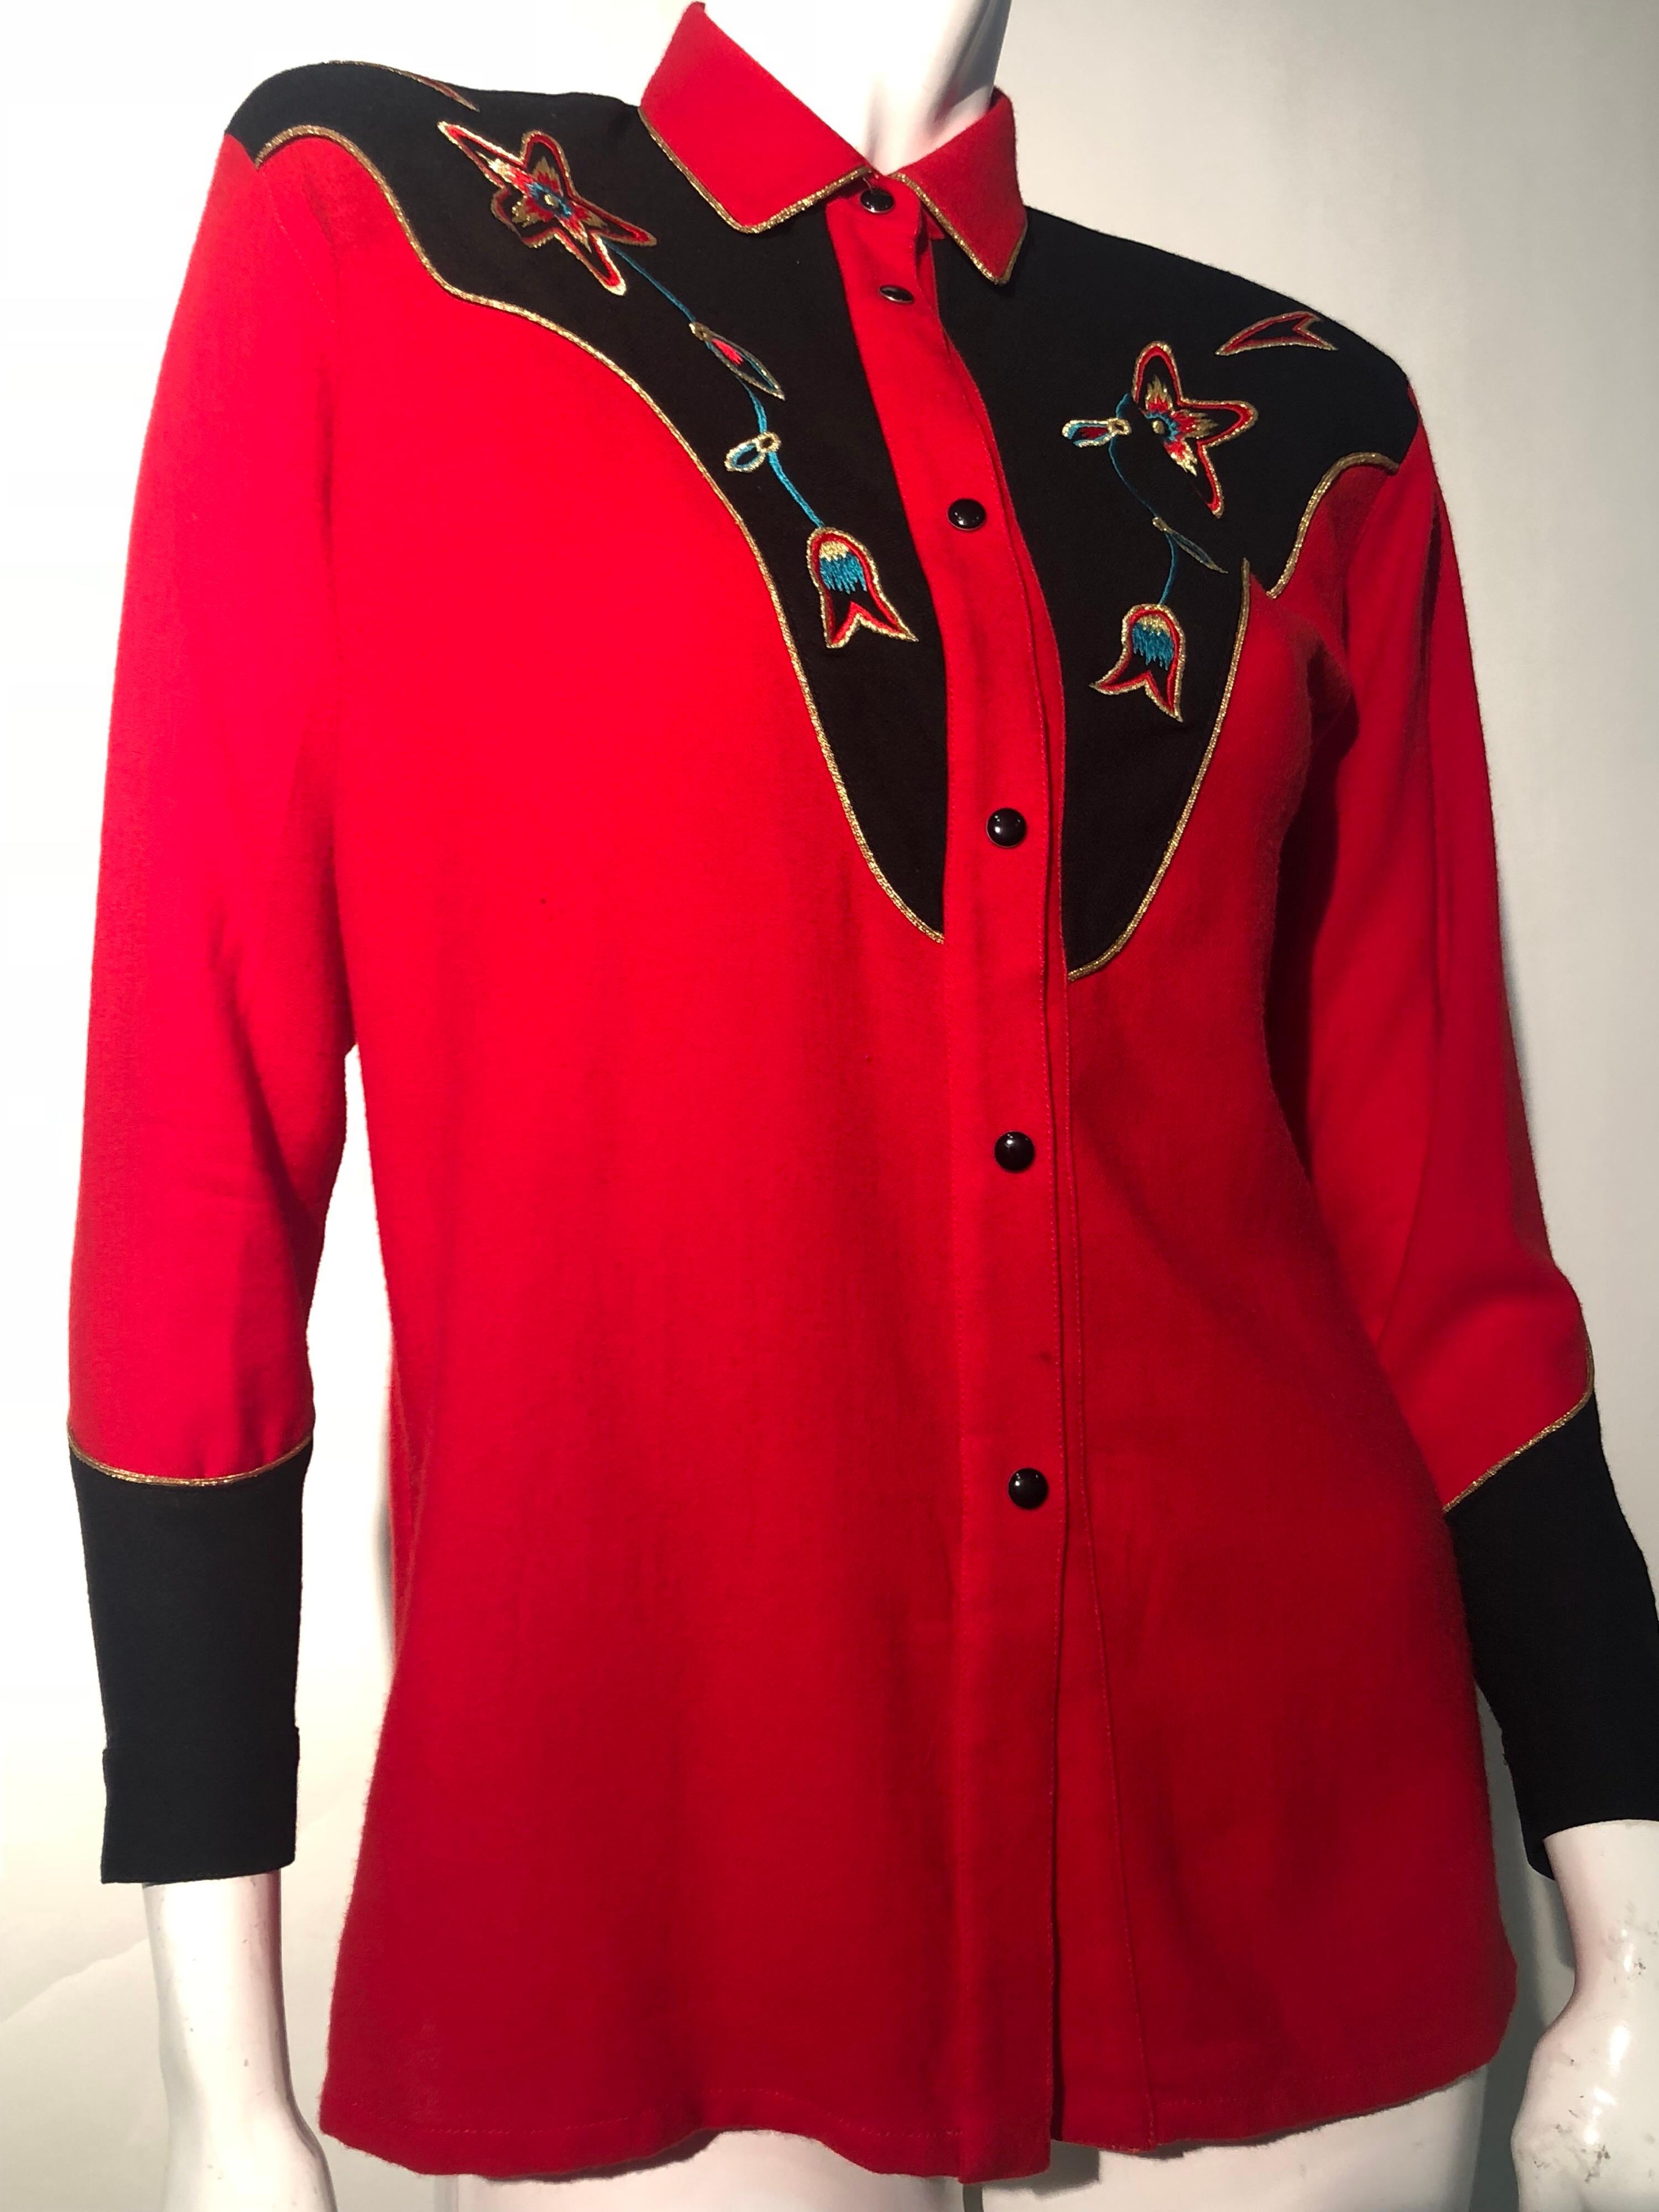 A wonderful 1980 Kansai Yamamoto embroidered-bib western shirt in red and black. Inspired by original 1950s Rockabilly style and music. Wool with silken embroidery and structured shoulder pads